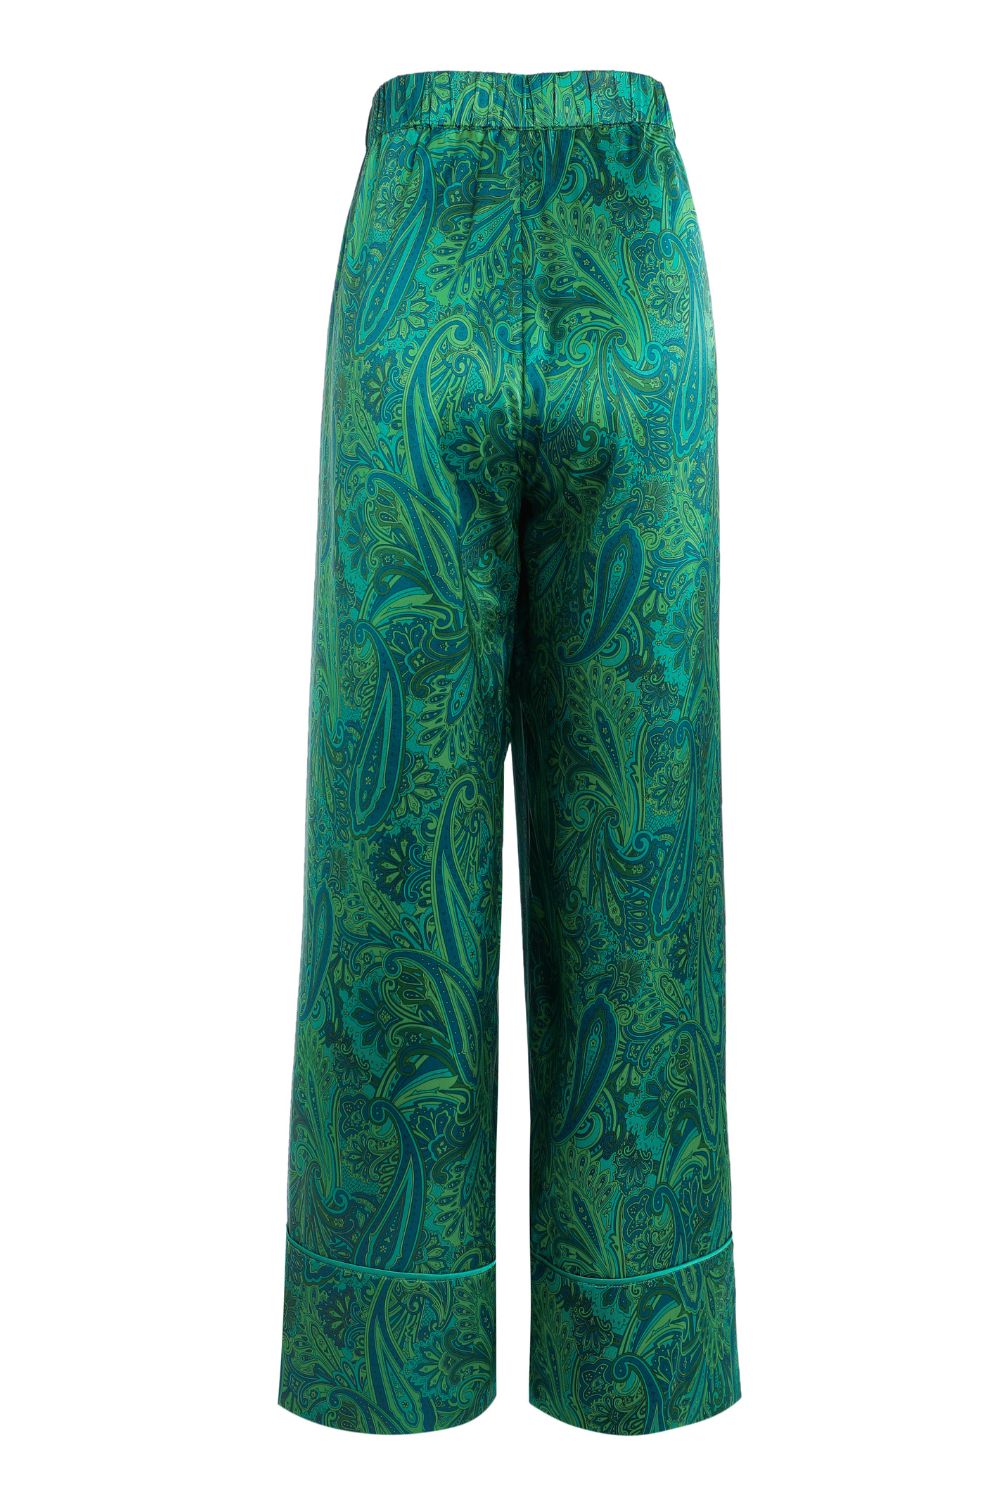 My Alexandria Peg Trousers from Named - Emerald Erin